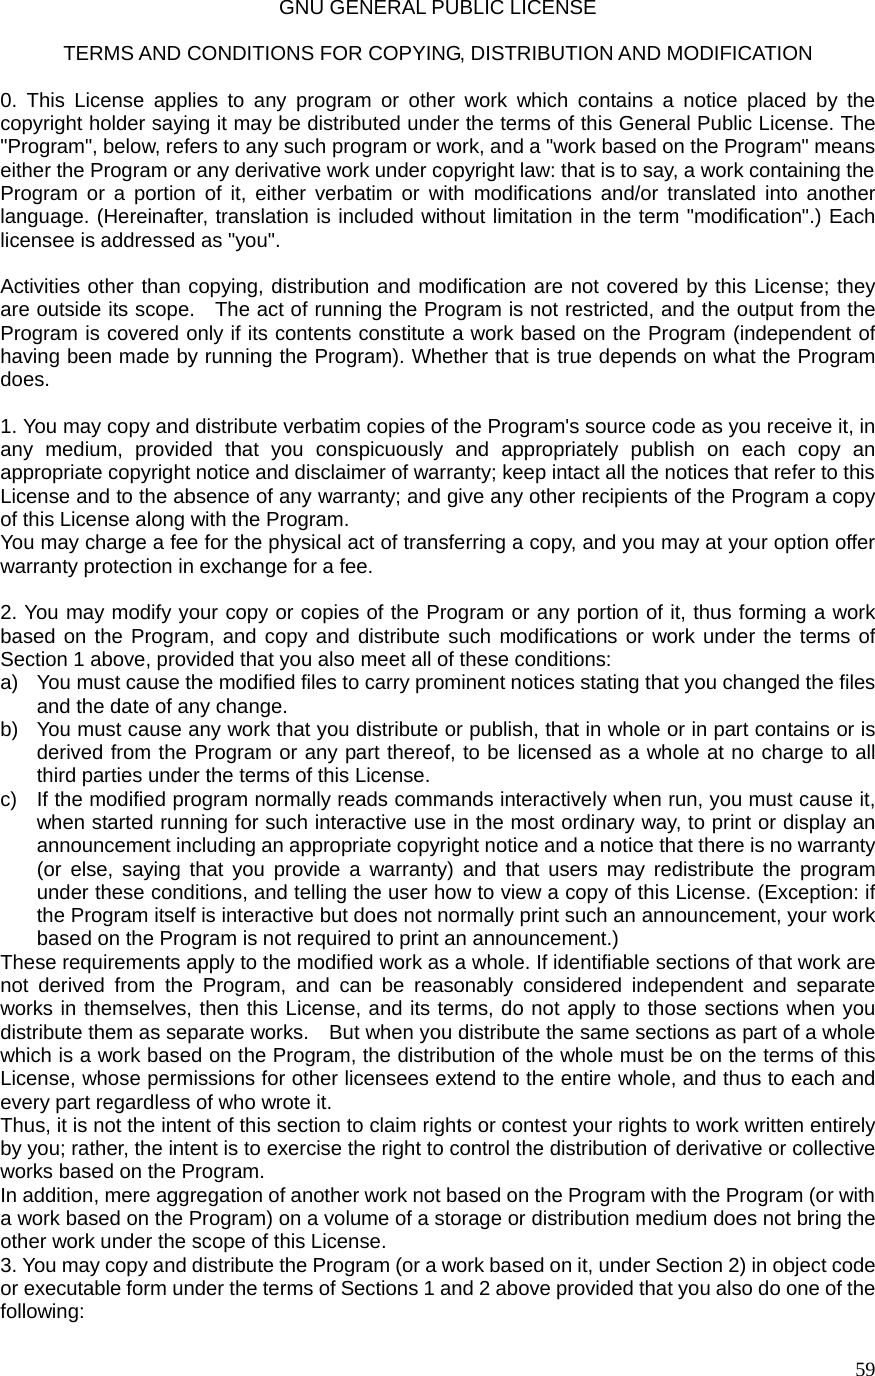  59GNU GENERAL PUBLIC LICENSE  TERMS AND CONDITIONS FOR COPYING, DISTRIBUTION AND MODIFICATION  0. This License applies to any program or other work which contains a notice placed by the copyright holder saying it may be distributed under the terms of this General Public License. The &quot;Program&quot;, below, refers to any such program or work, and a &quot;work based on the Program&quot; means either the Program or any derivative work under copyright law: that is to say, a work containing the Program or a portion of it, either verbatim or with modifications and/or translated into another language. (Hereinafter, translation is included without limitation in the term &quot;modification&quot;.) Each licensee is addressed as &quot;you&quot;.  Activities other than copying, distribution and modification are not covered by this License; they are outside its scope.    The act of running the Program is not restricted, and the output from the Program is covered only if its contents constitute a work based on the Program (independent of having been made by running the Program). Whether that is true depends on what the Program does.  1. You may copy and distribute verbatim copies of the Program&apos;s source code as you receive it, in any medium, provided that you conspicuously and appropriately publish on each copy an appropriate copyright notice and disclaimer of warranty; keep intact all the notices that refer to this License and to the absence of any warranty; and give any other recipients of the Program a copy of this License along with the Program. You may charge a fee for the physical act of transferring a copy, and you may at your option offer warranty protection in exchange for a fee.  2. You may modify your copy or copies of the Program or any portion of it, thus forming a work based on the Program, and copy and distribute such modifications or work under the terms of Section 1 above, provided that you also meet all of these conditions: a)  You must cause the modified files to carry prominent notices stating that you changed the files and the date of any change. b)  You must cause any work that you distribute or publish, that in whole or in part contains or is derived from the Program or any part thereof, to be licensed as a whole at no charge to all third parties under the terms of this License. c)  If the modified program normally reads commands interactively when run, you must cause it, when started running for such interactive use in the most ordinary way, to print or display an announcement including an appropriate copyright notice and a notice that there is no warranty (or else, saying that you provide a warranty) and that users may redistribute the program under these conditions, and telling the user how to view a copy of this License. (Exception: if the Program itself is interactive but does not normally print such an announcement, your work based on the Program is not required to print an announcement.) These requirements apply to the modified work as a whole. If identifiable sections of that work are not derived from the Program, and can be reasonably considered independent and separate works in themselves, then this License, and its terms, do not apply to those sections when you distribute them as separate works.    But when you distribute the same sections as part of a whole which is a work based on the Program, the distribution of the whole must be on the terms of this License, whose permissions for other licensees extend to the entire whole, and thus to each and every part regardless of who wrote it. Thus, it is not the intent of this section to claim rights or contest your rights to work written entirely by you; rather, the intent is to exercise the right to control the distribution of derivative or collective works based on the Program. In addition, mere aggregation of another work not based on the Program with the Program (or with a work based on the Program) on a volume of a storage or distribution medium does not bring the other work under the scope of this License. 3. You may copy and distribute the Program (or a work based on it, under Section 2) in object code or executable form under the terms of Sections 1 and 2 above provided that you also do one of the following: 